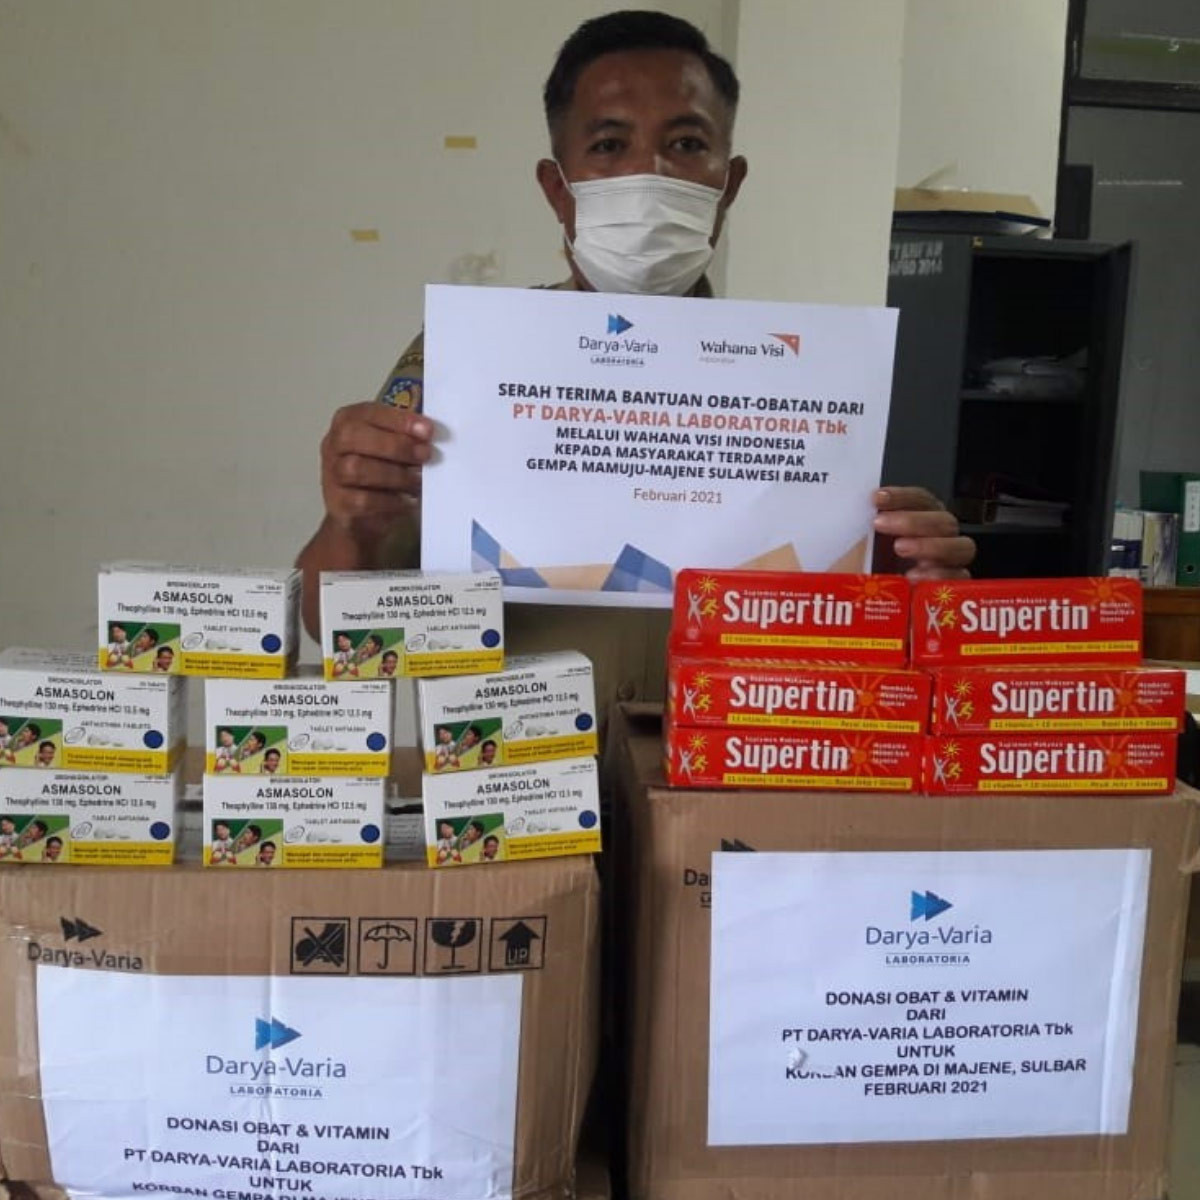 Supporting WVI, Darya-Varia Help The People Affected by Earthquake in West Sulawesi